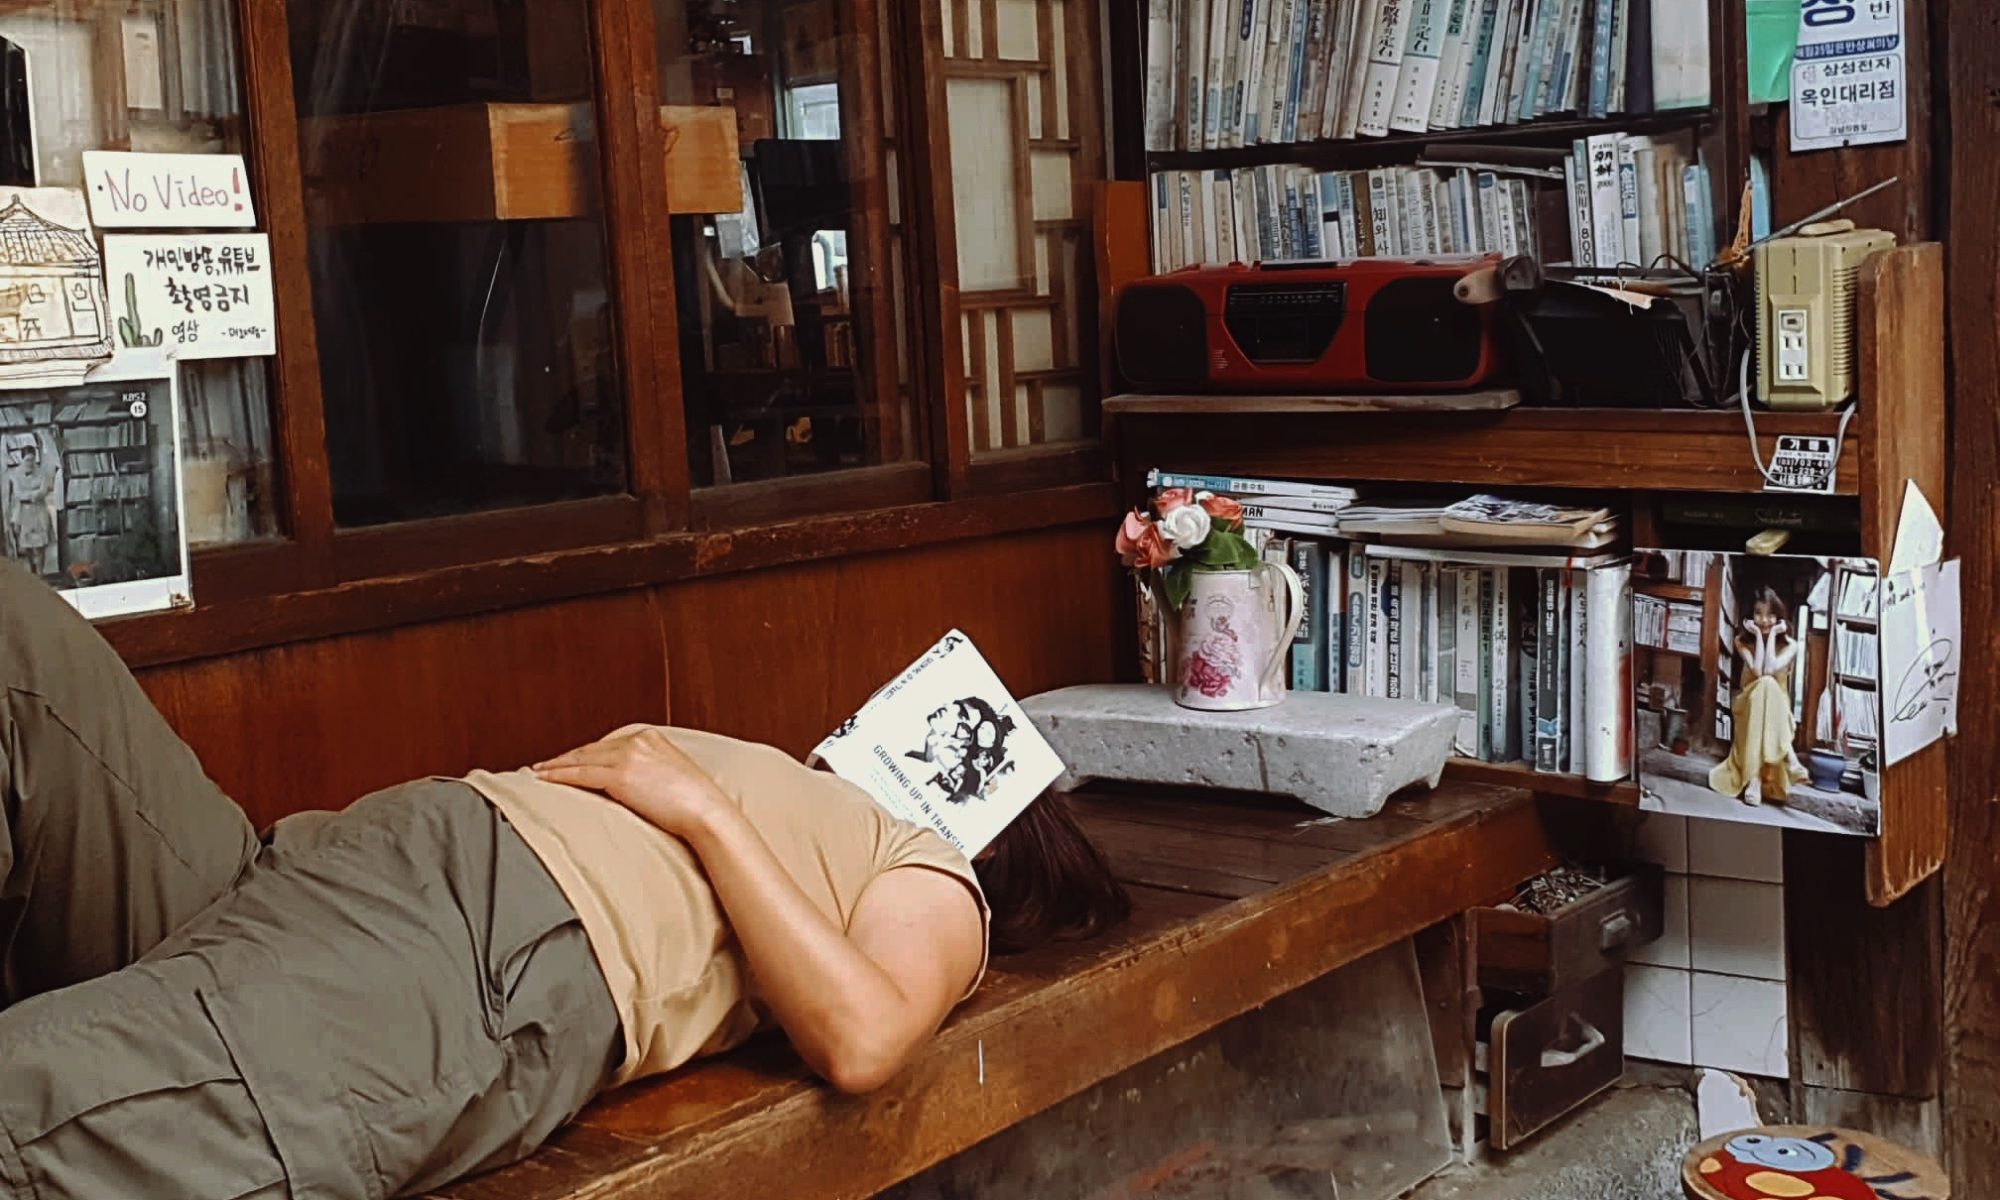 Photo of a woman lying on the engawa of an old Korean bookstore taking a nap. A copy of Growing Up in Transit covering her face. A bookshelf can be seen in the background.